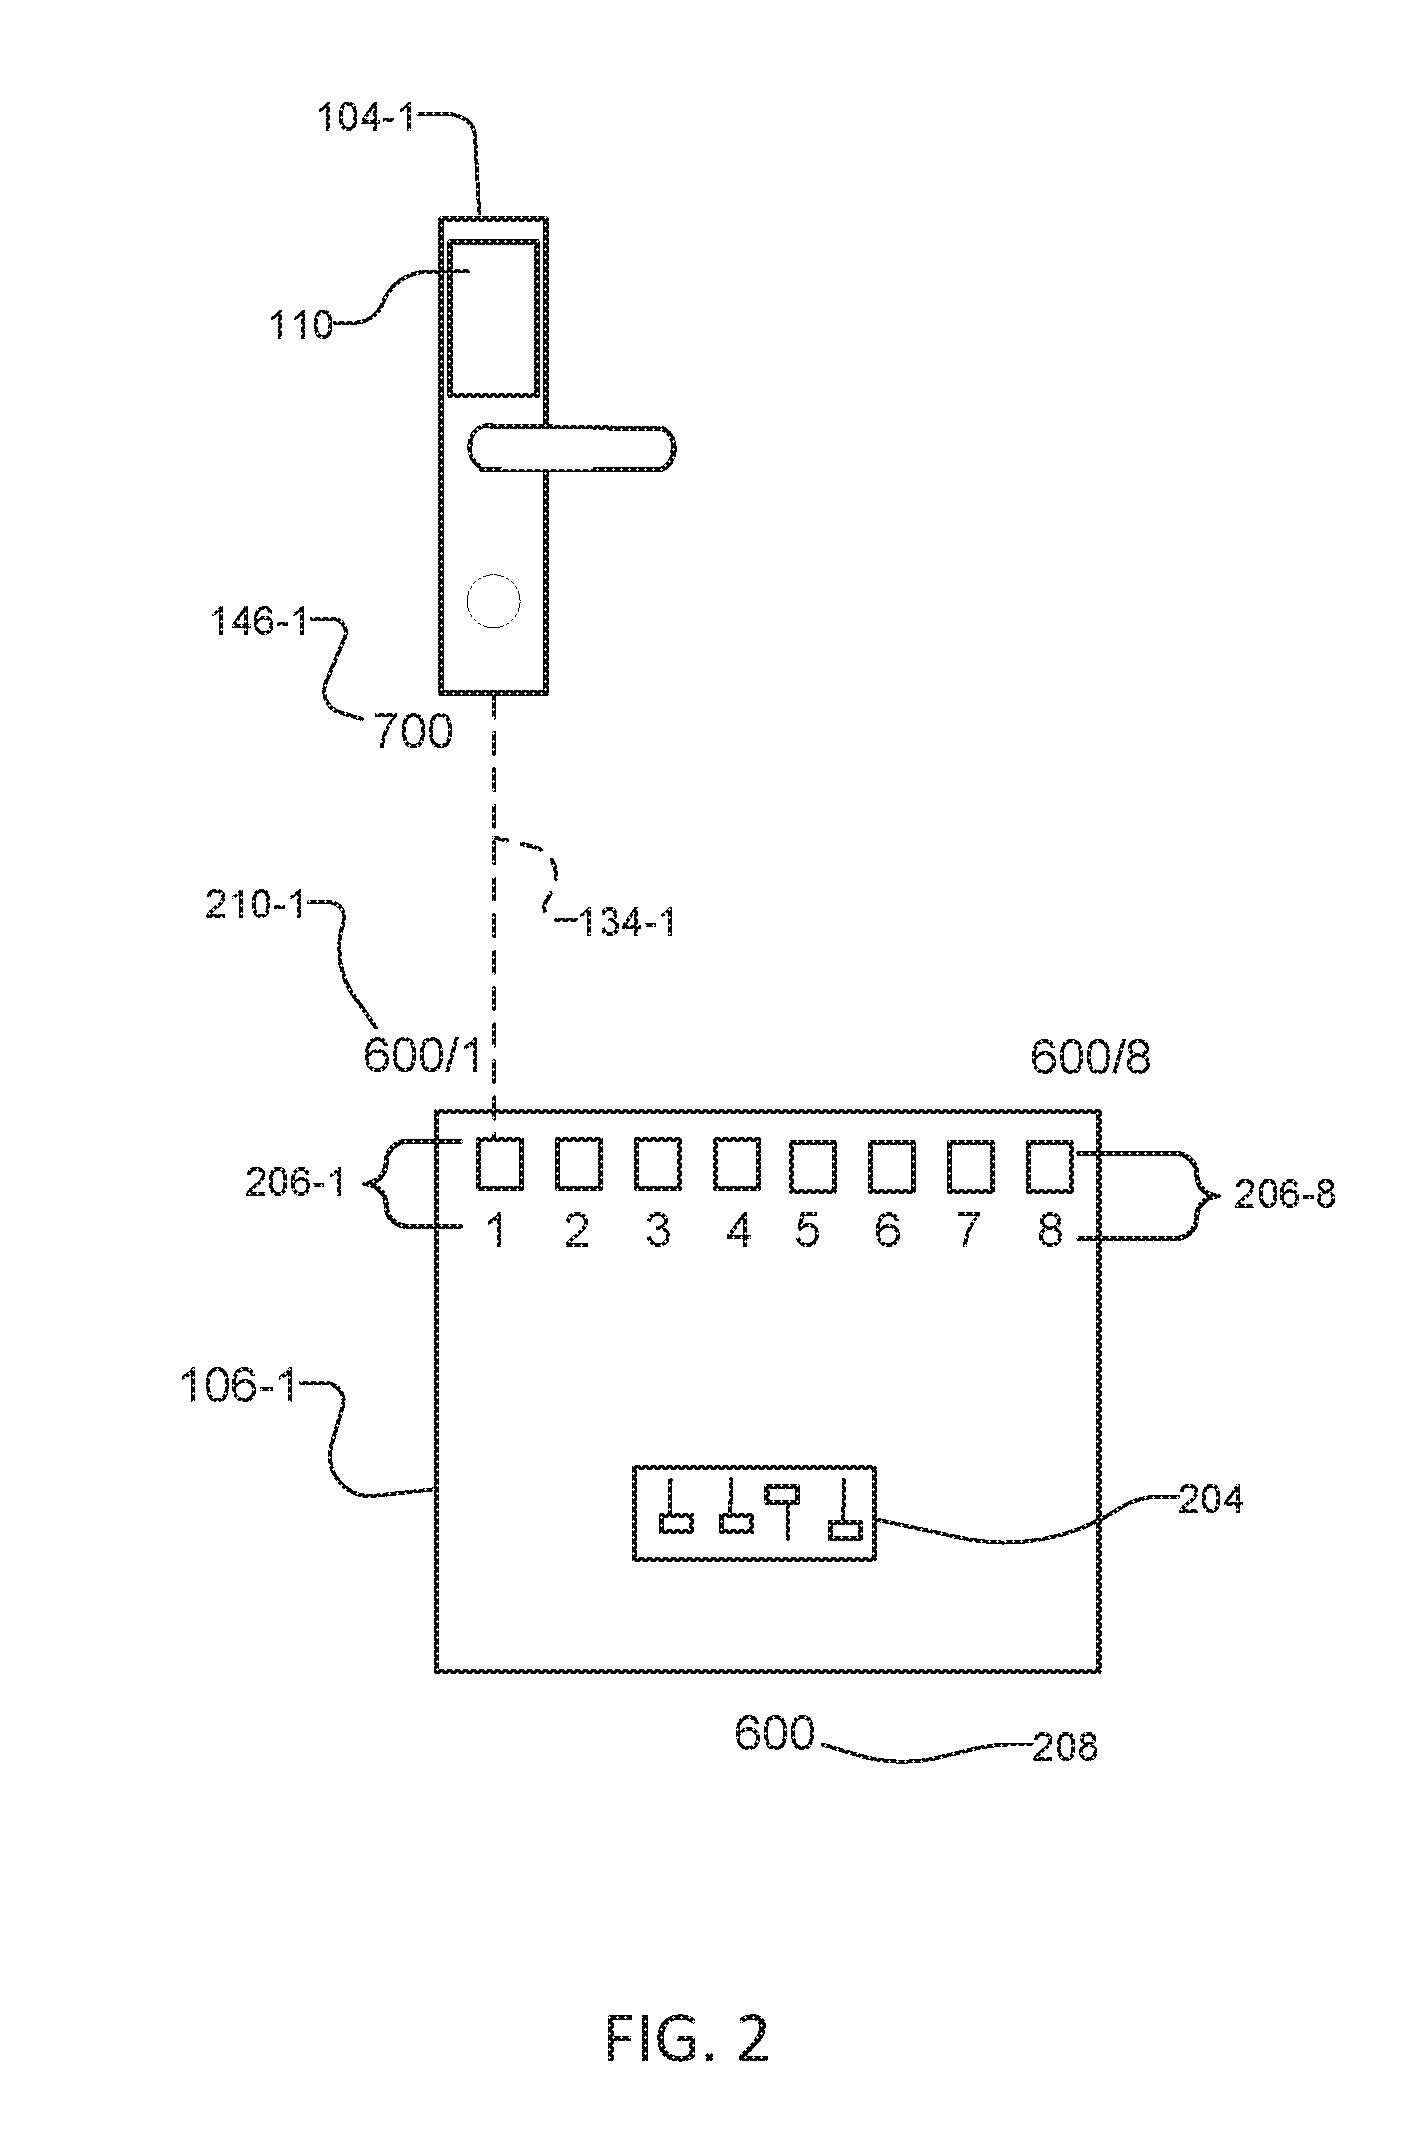 Method and System for Self-discovery and Management of Wireless Security Devices